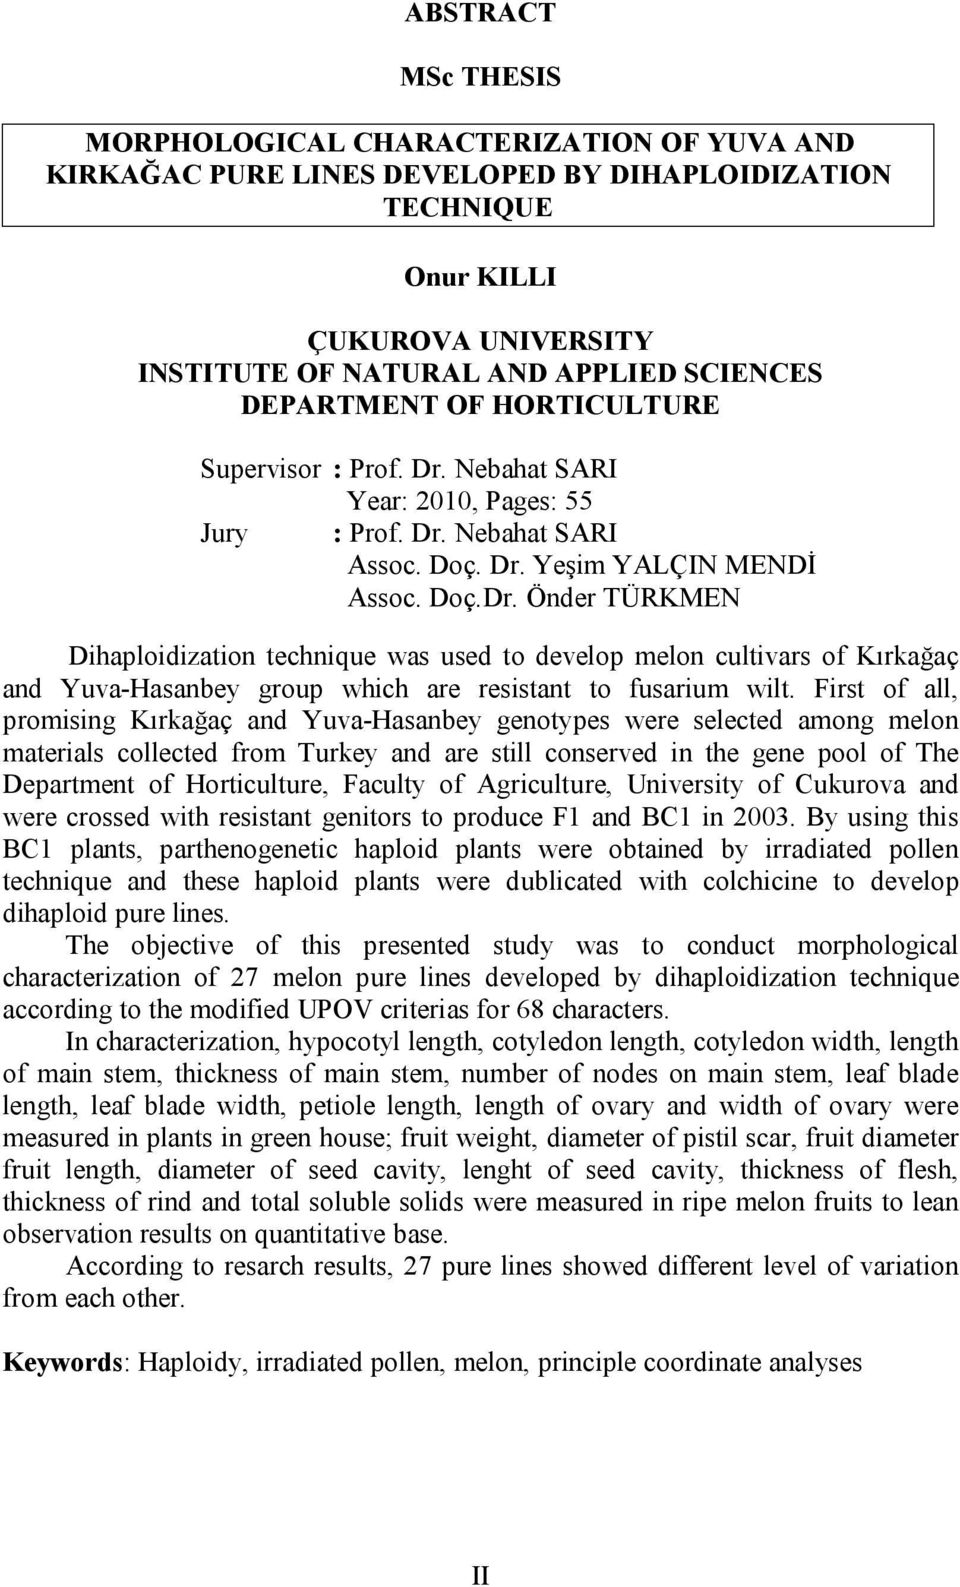 First of all, promising Kırkağaç and Yuva-Hasanbey genotypes were selected among melon materials collected from Turkey and are still conserved in the gene pool of The Department of Horticulture,